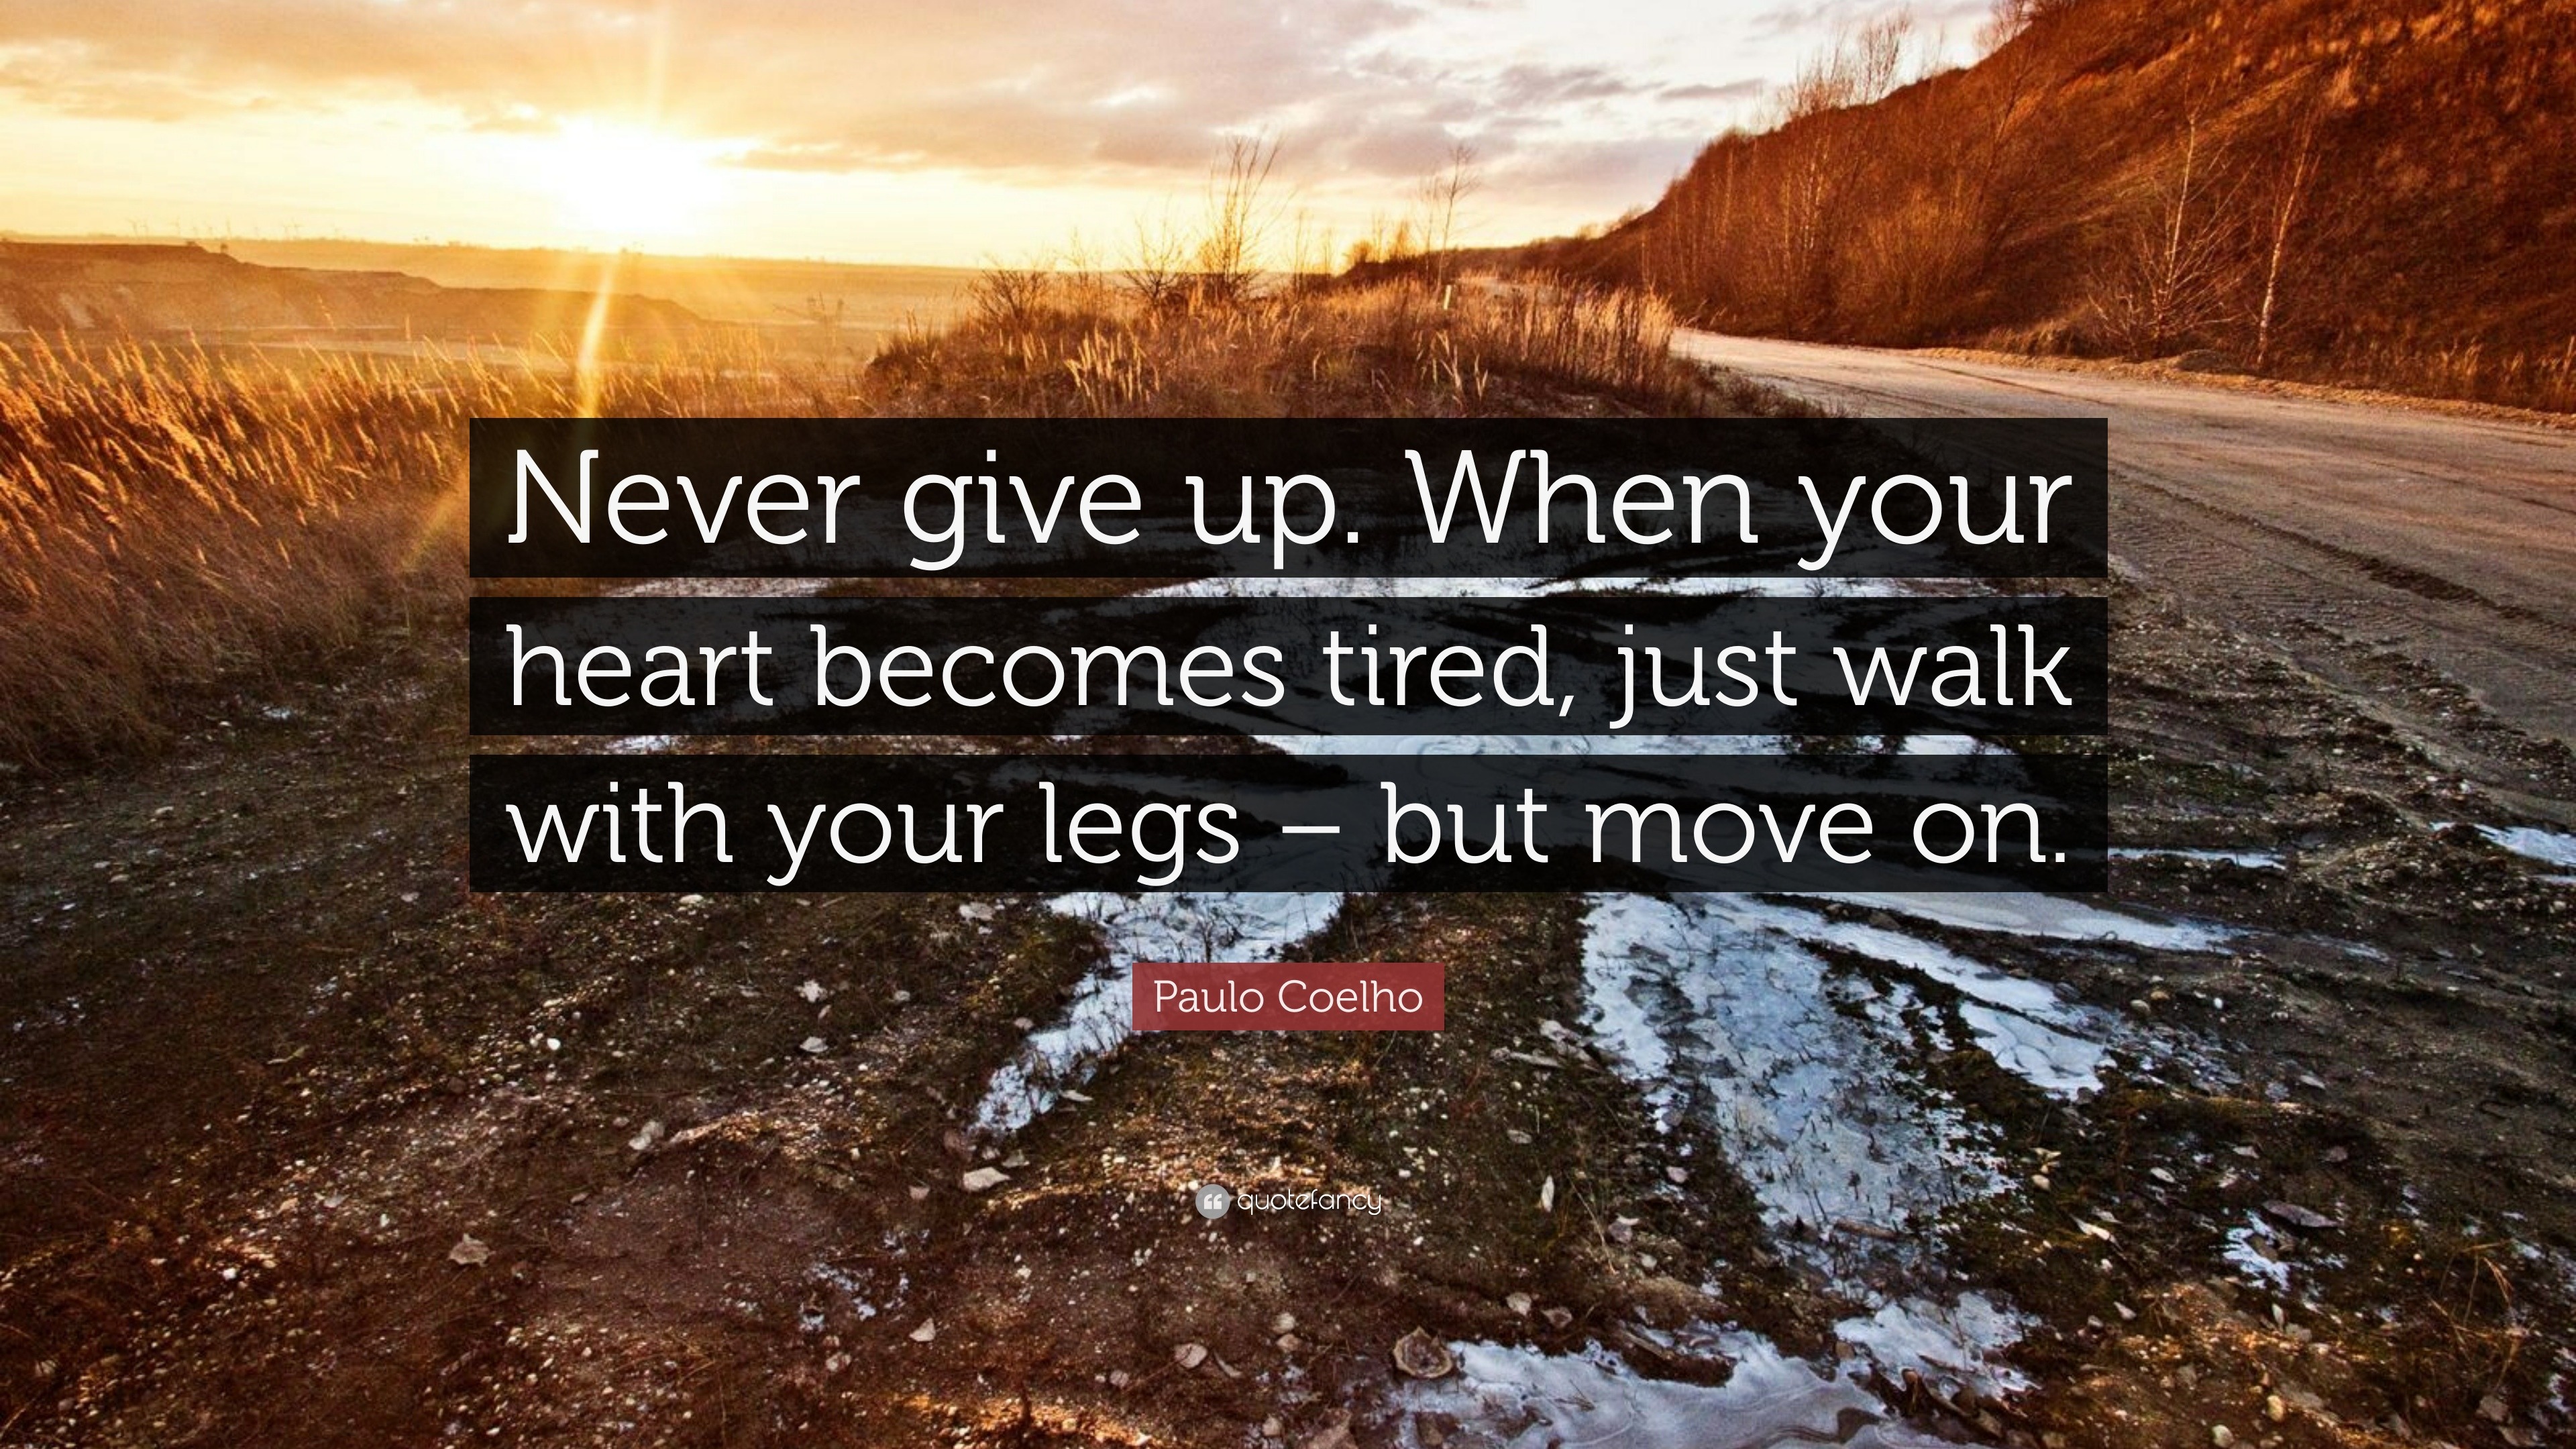 Paulo Coelho Quote “Never give up When your heart be es tired just